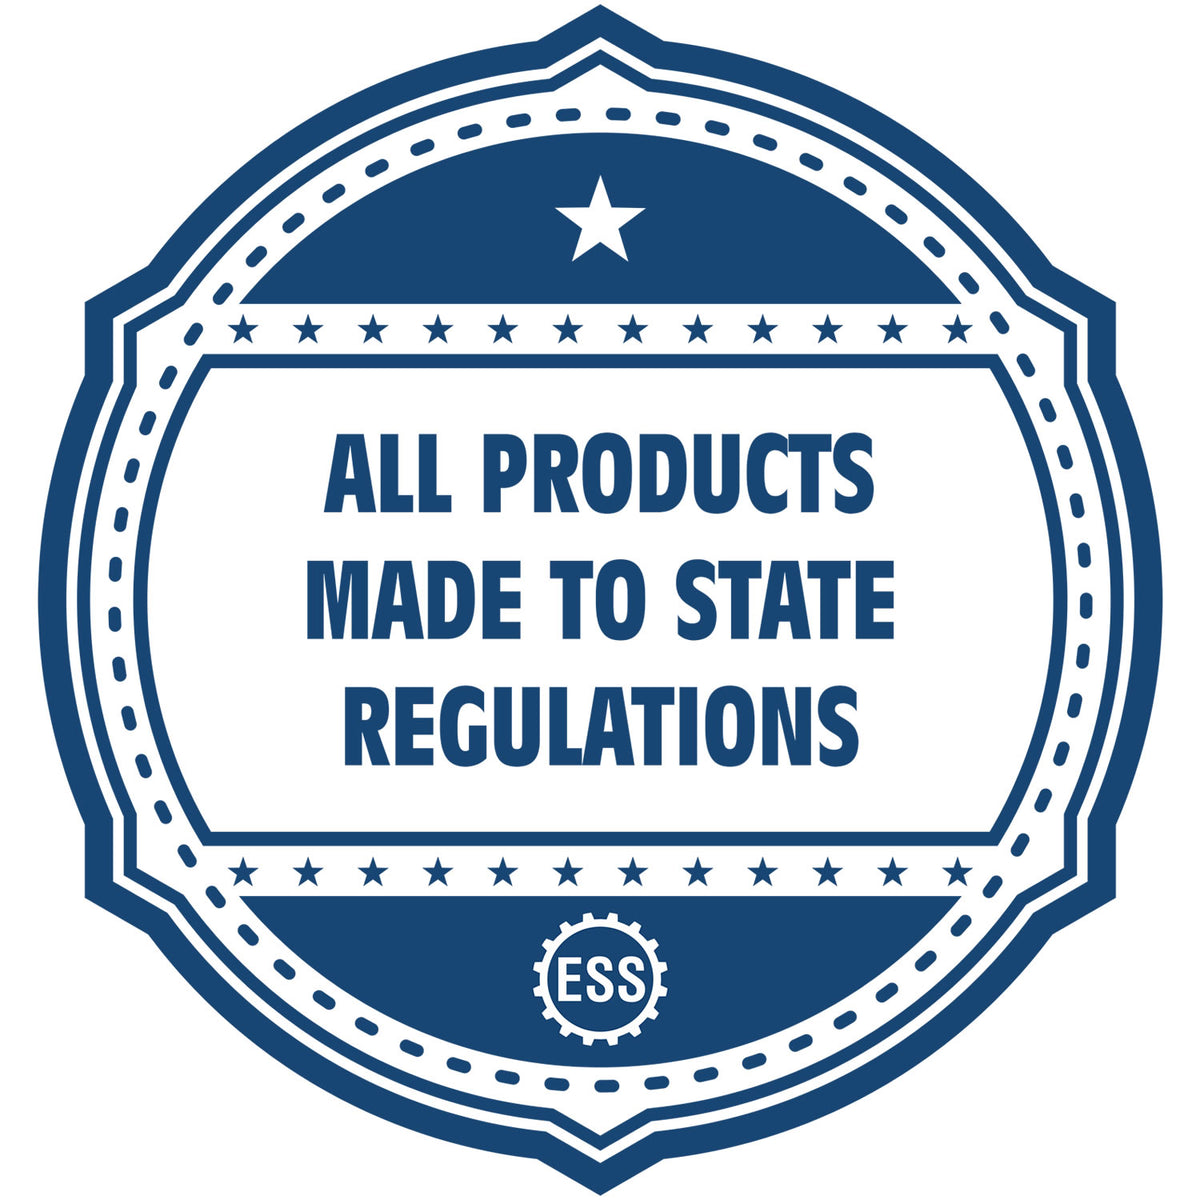 An icon or badge element for the Heavy-Duty Wyoming Rectangular Notary Stamp showing that this product is made in compliance with state regulations.